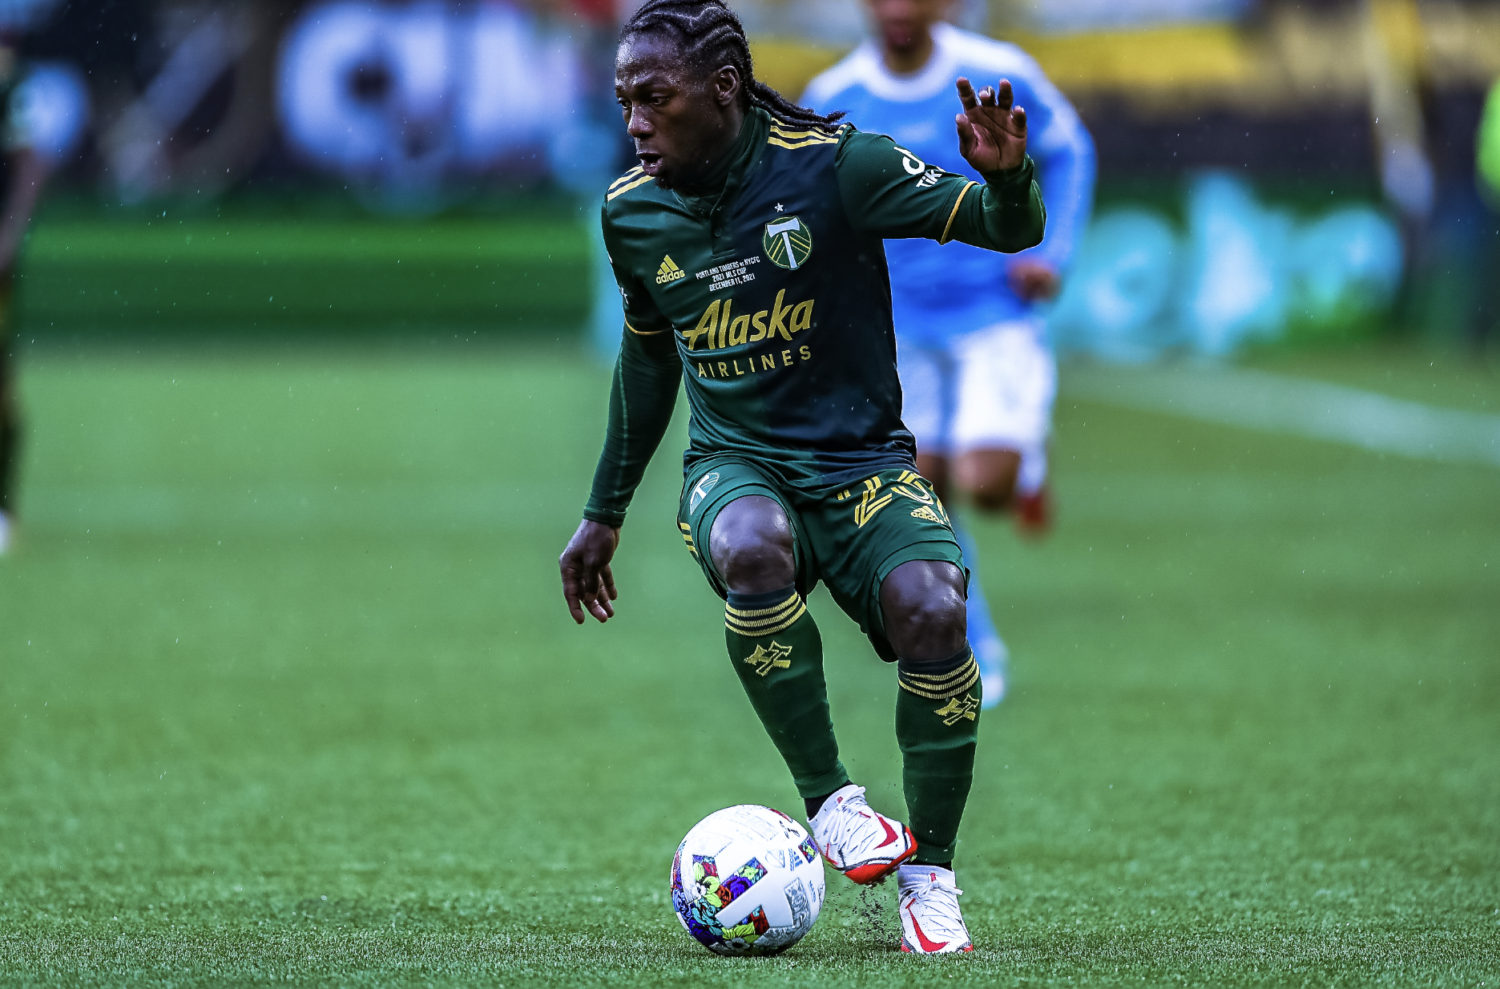 The Portland Timbers boosting their defense ahead of a contested